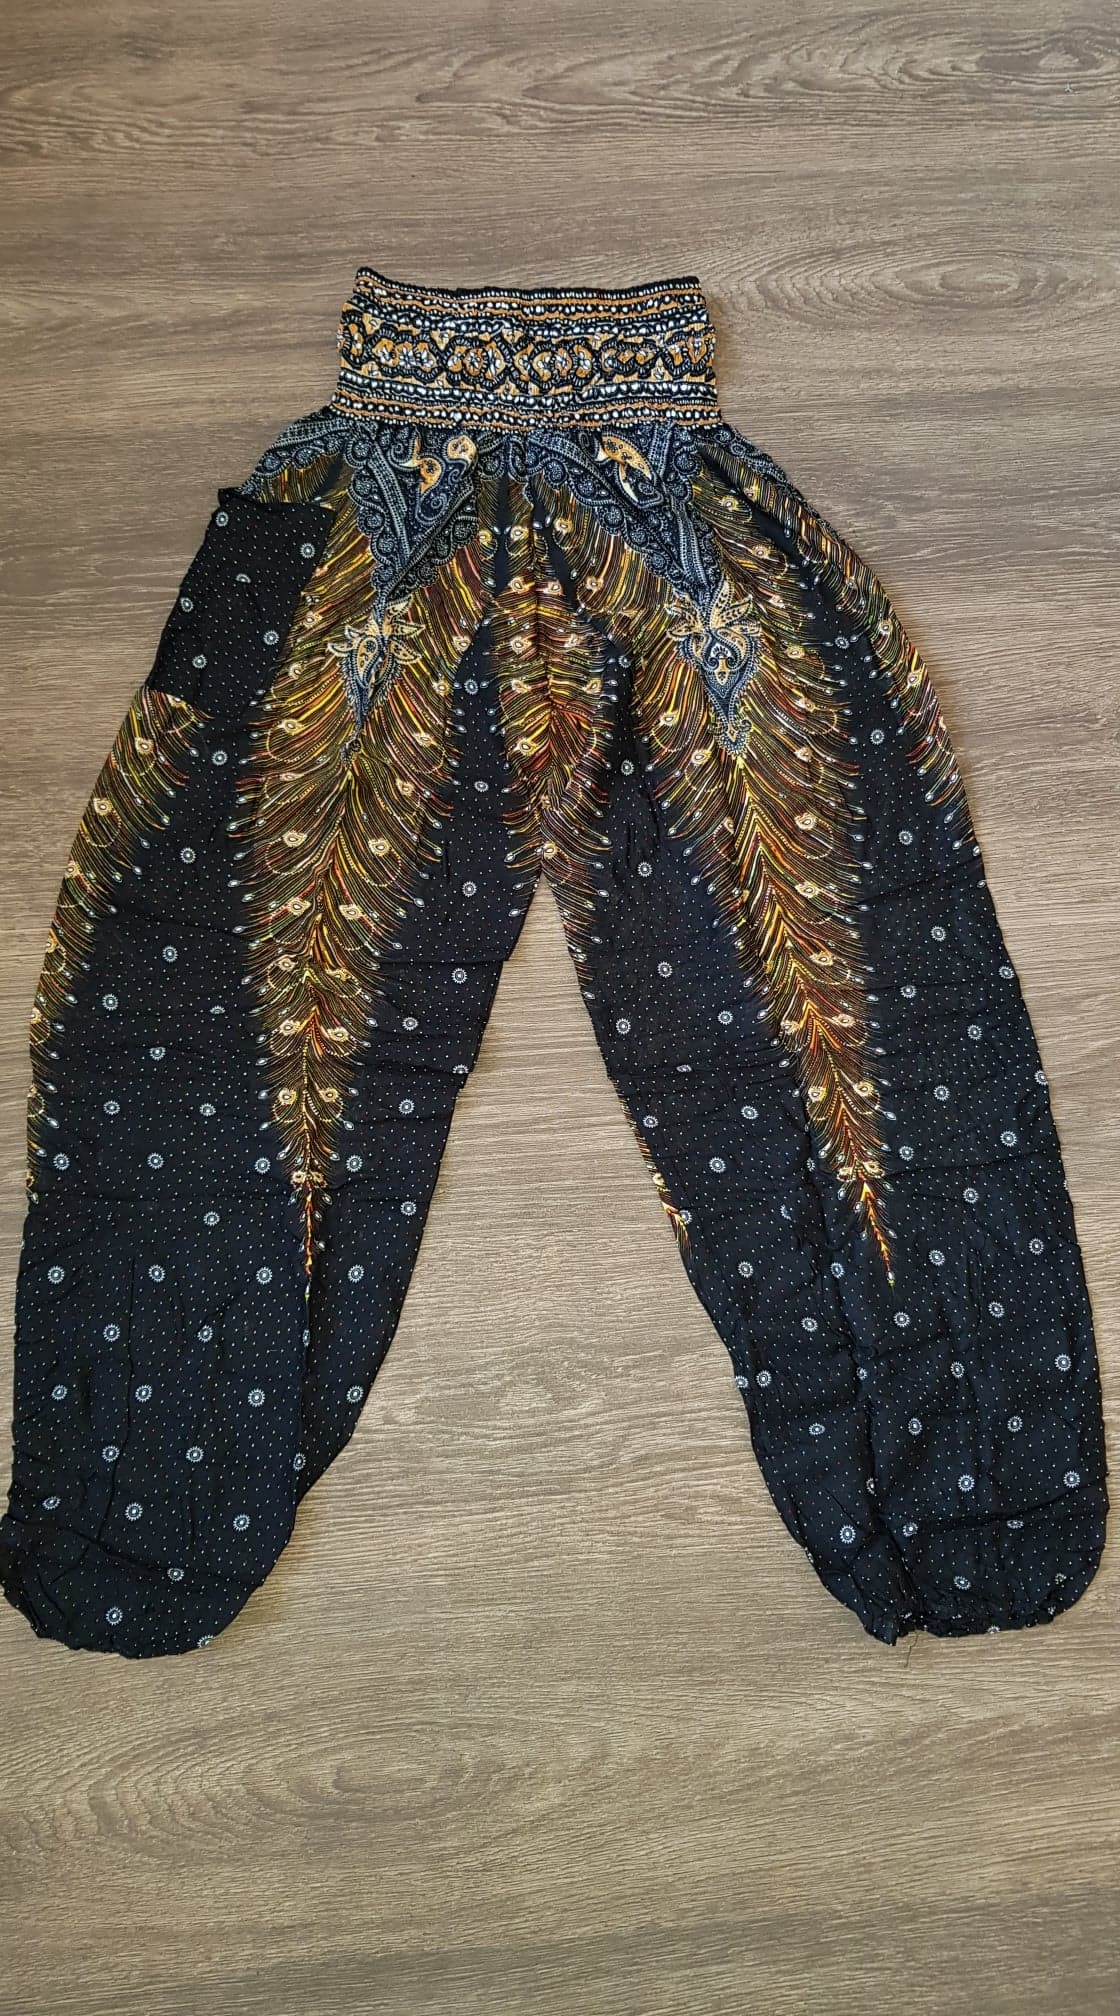 High Cut Harem Pants – Peacock Feather – Black – Medium/Large / Black With Gold Feather – The Karmic Chameleon